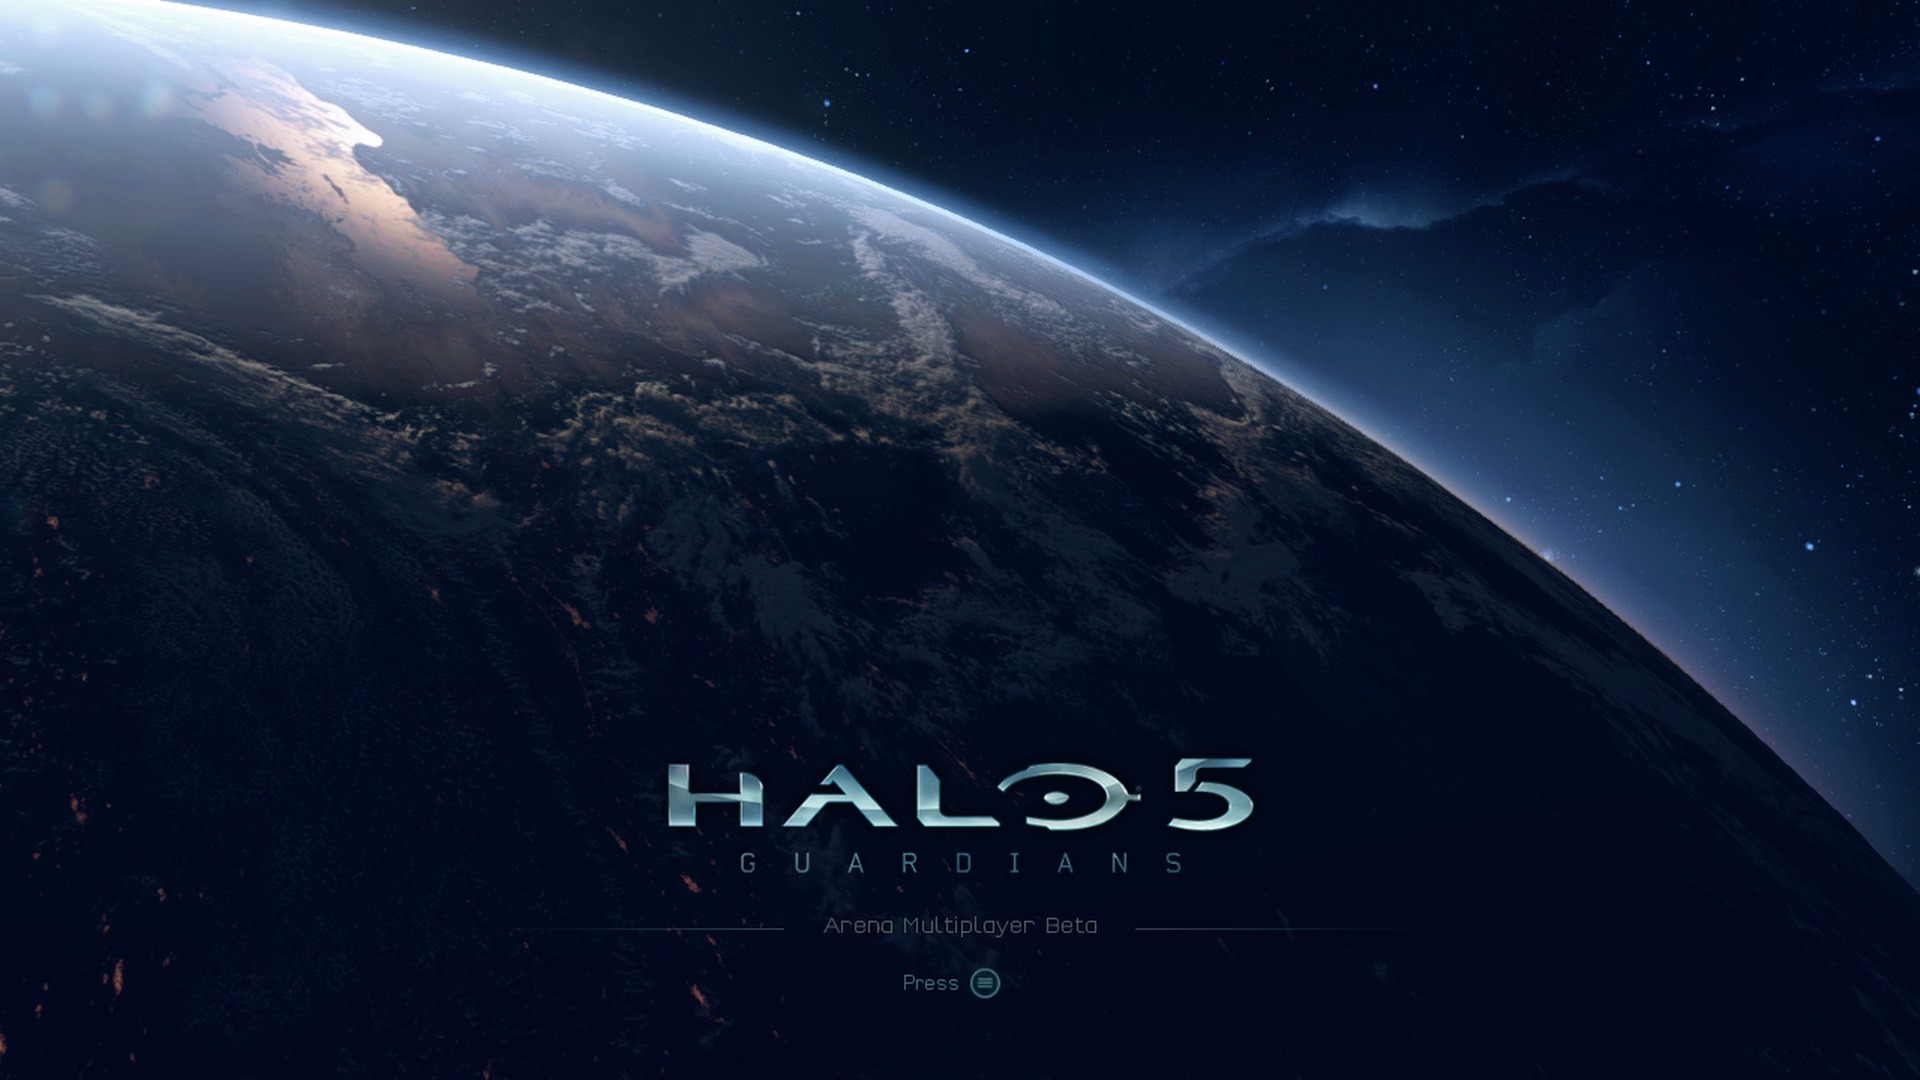 General 1920x1080 Halo (game) Halo 5 video games Halo 5: Guardians planet science fiction 343 Industries Xbox Game Studios